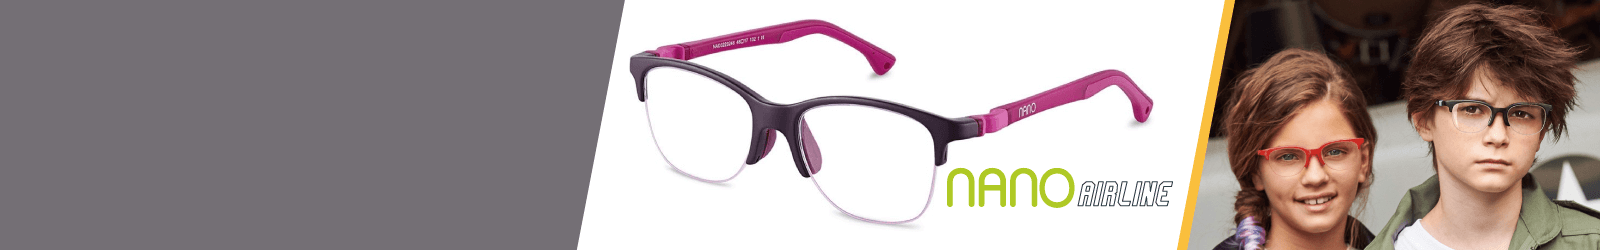 Nano Airline Kids Glasses from 2 to 4-year-old for Girls